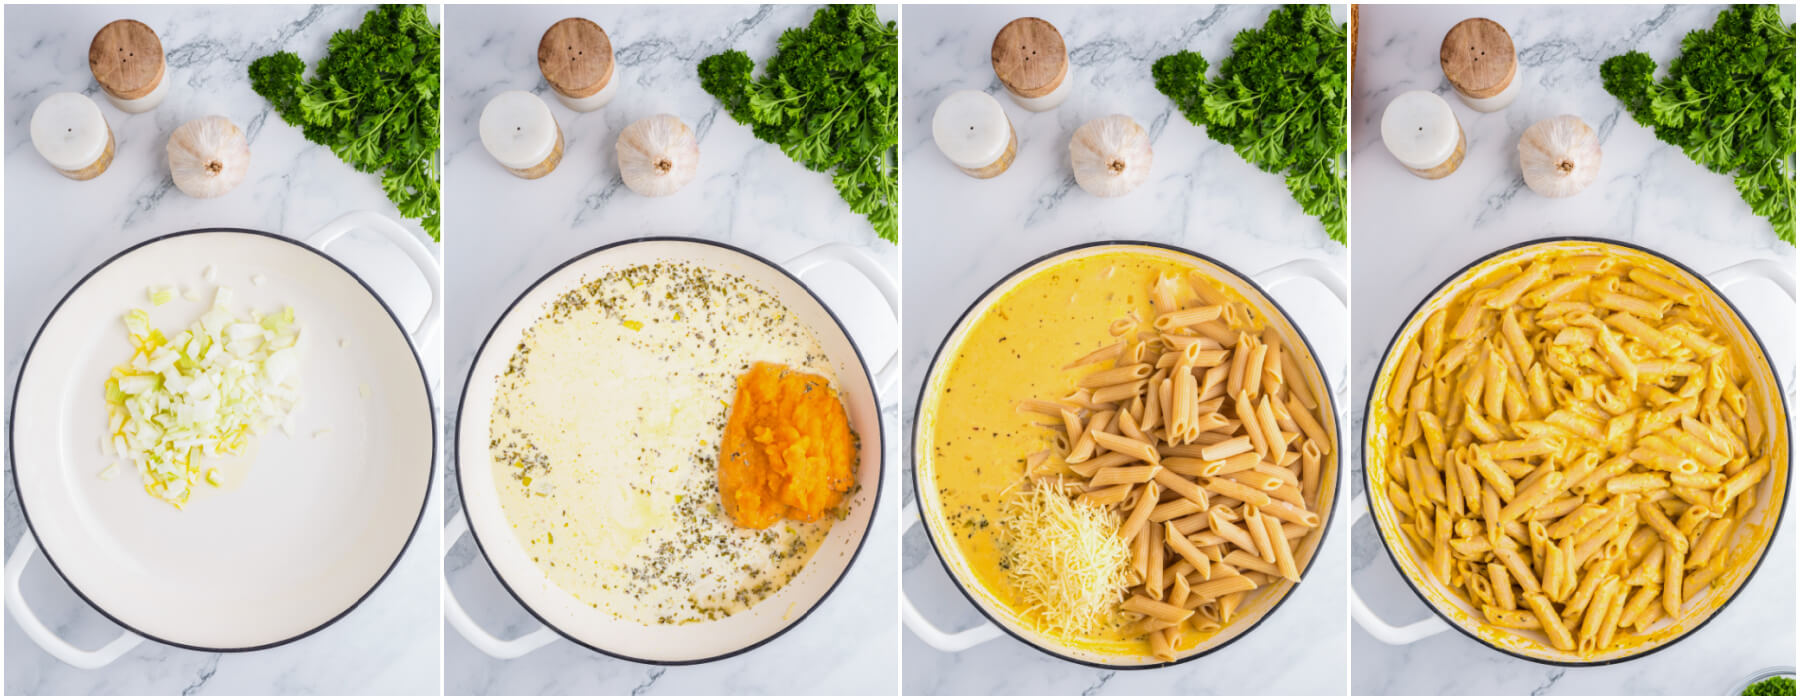 Process images showing how to make creamy pumpkin pasta sauce with penne in a large white enamel pan.